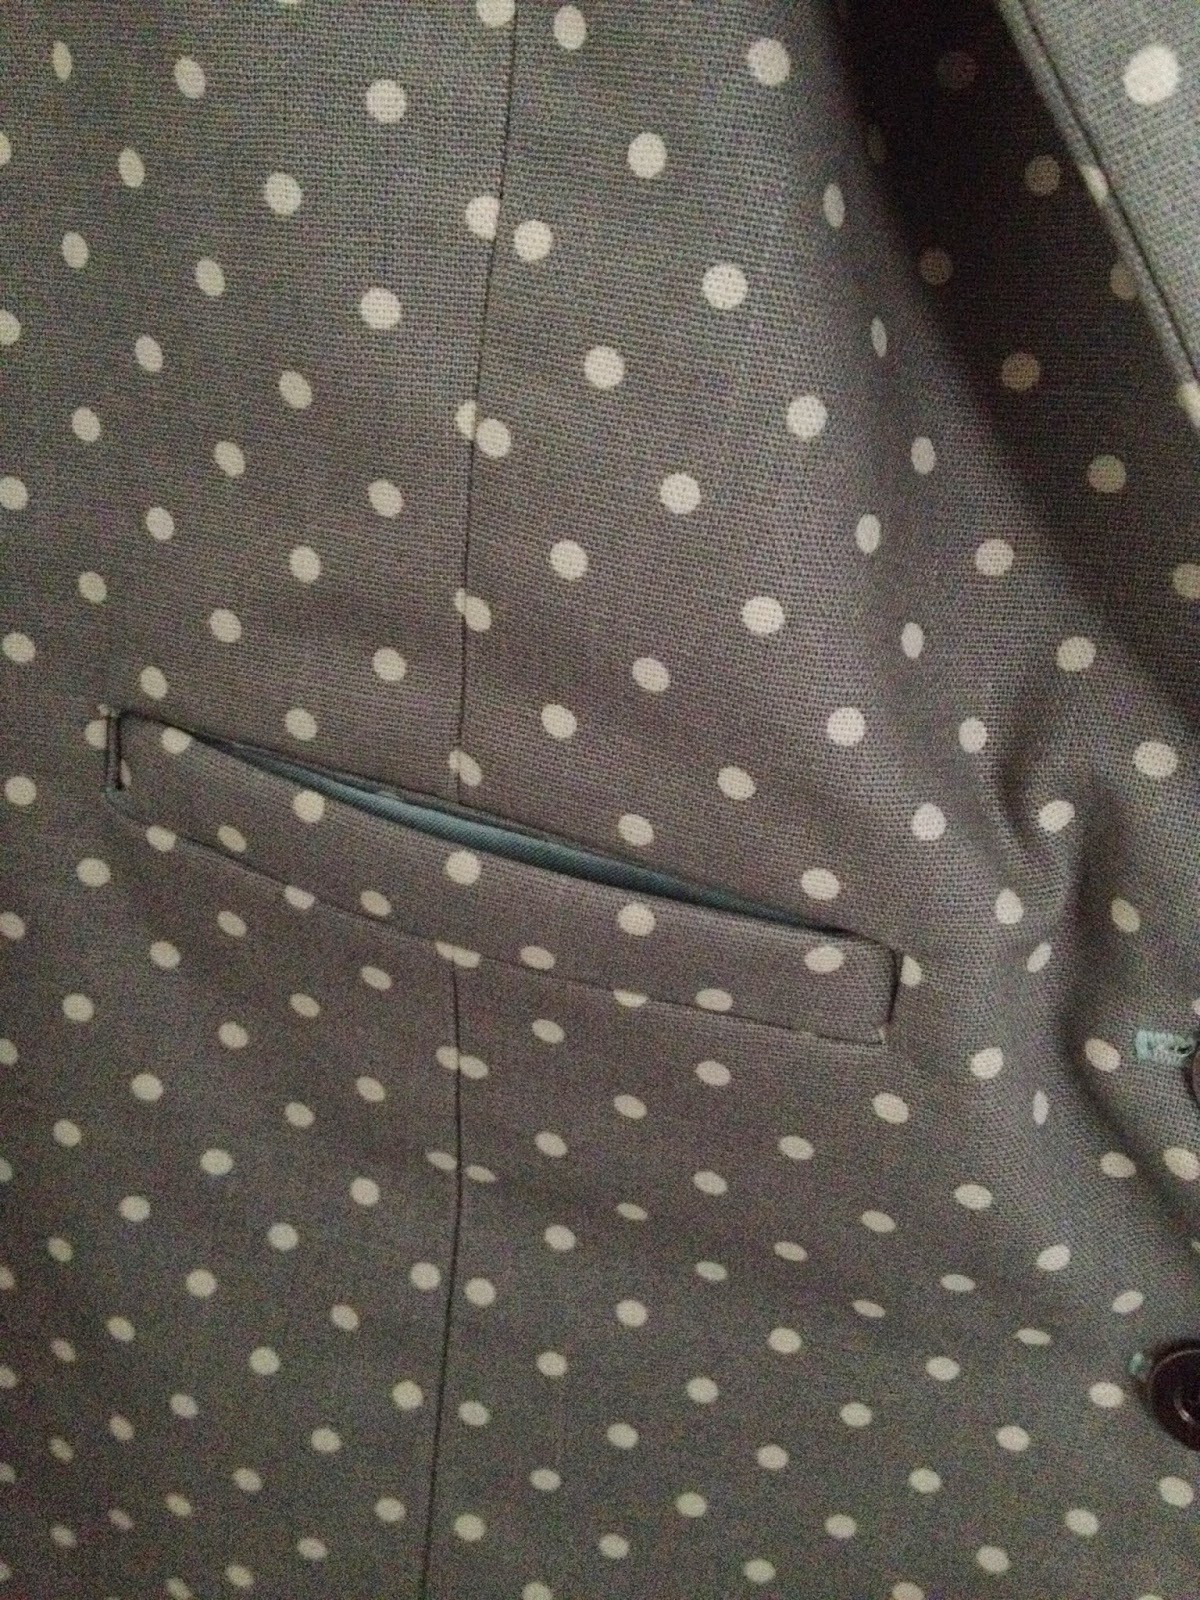 Diary of a Chain Stitcher: Polka Dot Chloe Jacket from Jolie Marie Louise